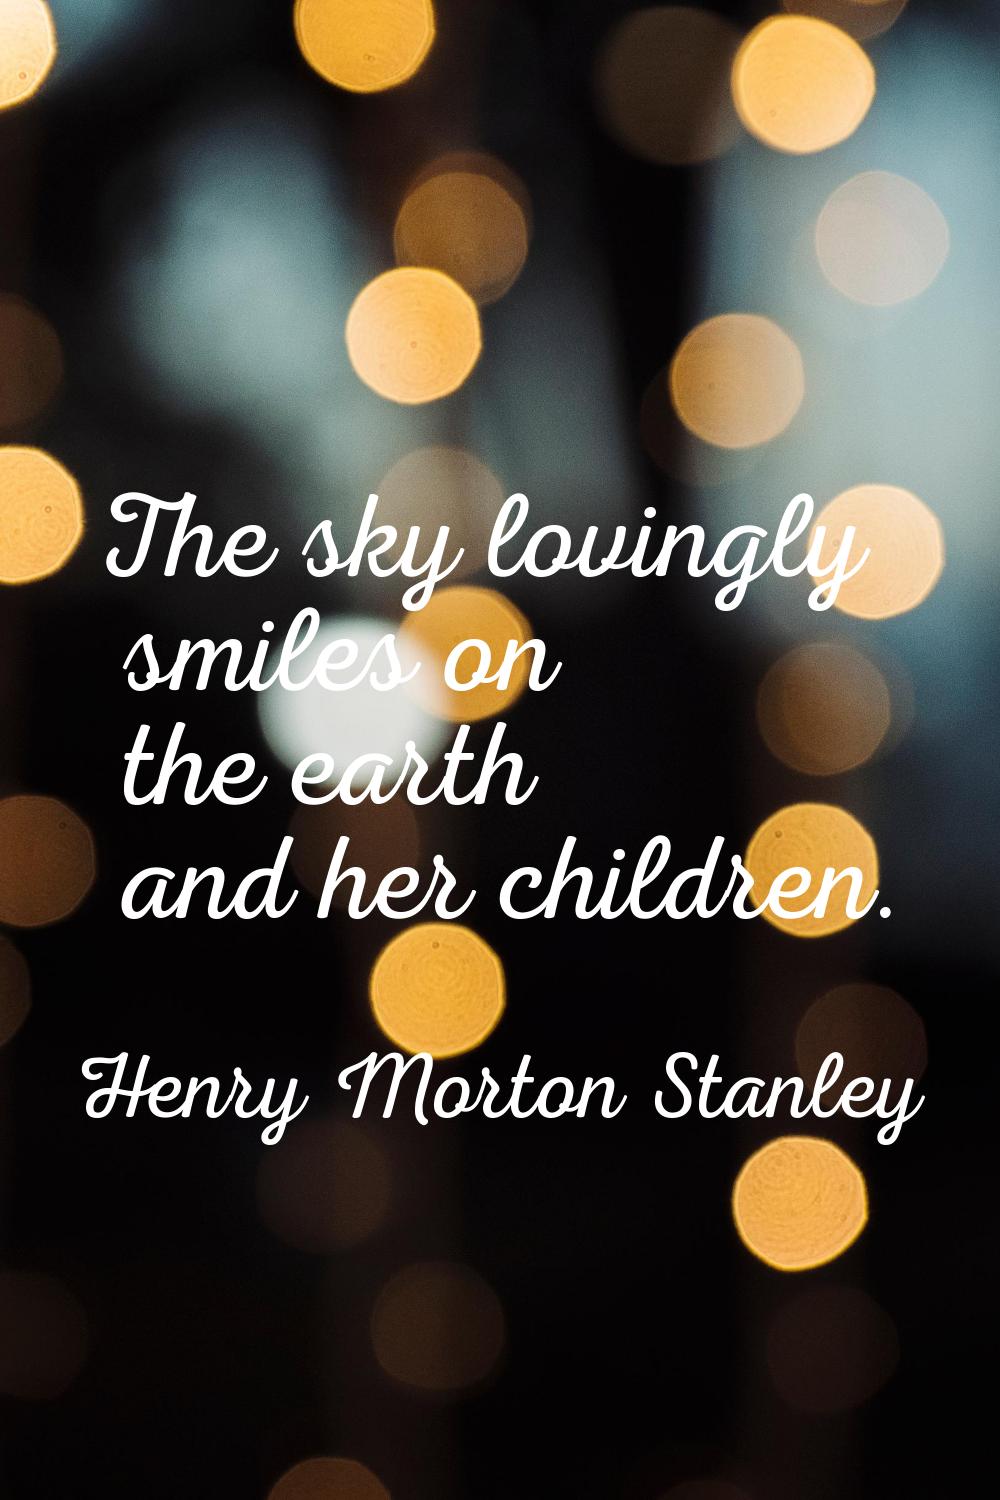 The sky lovingly smiles on the earth and her children.